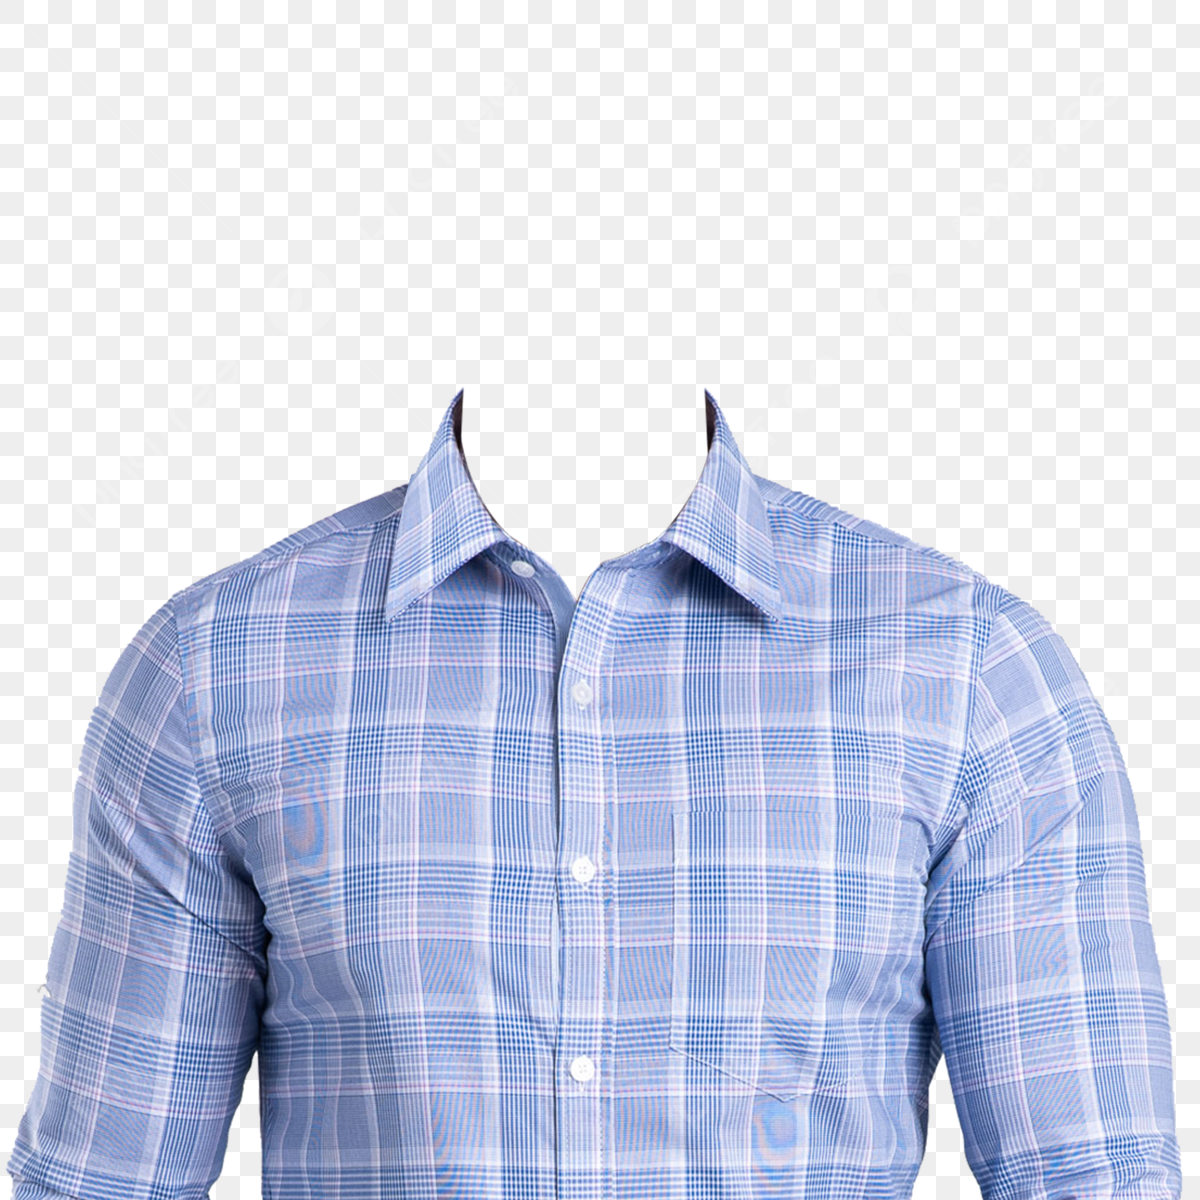 White Shirt Psd For Photoshop